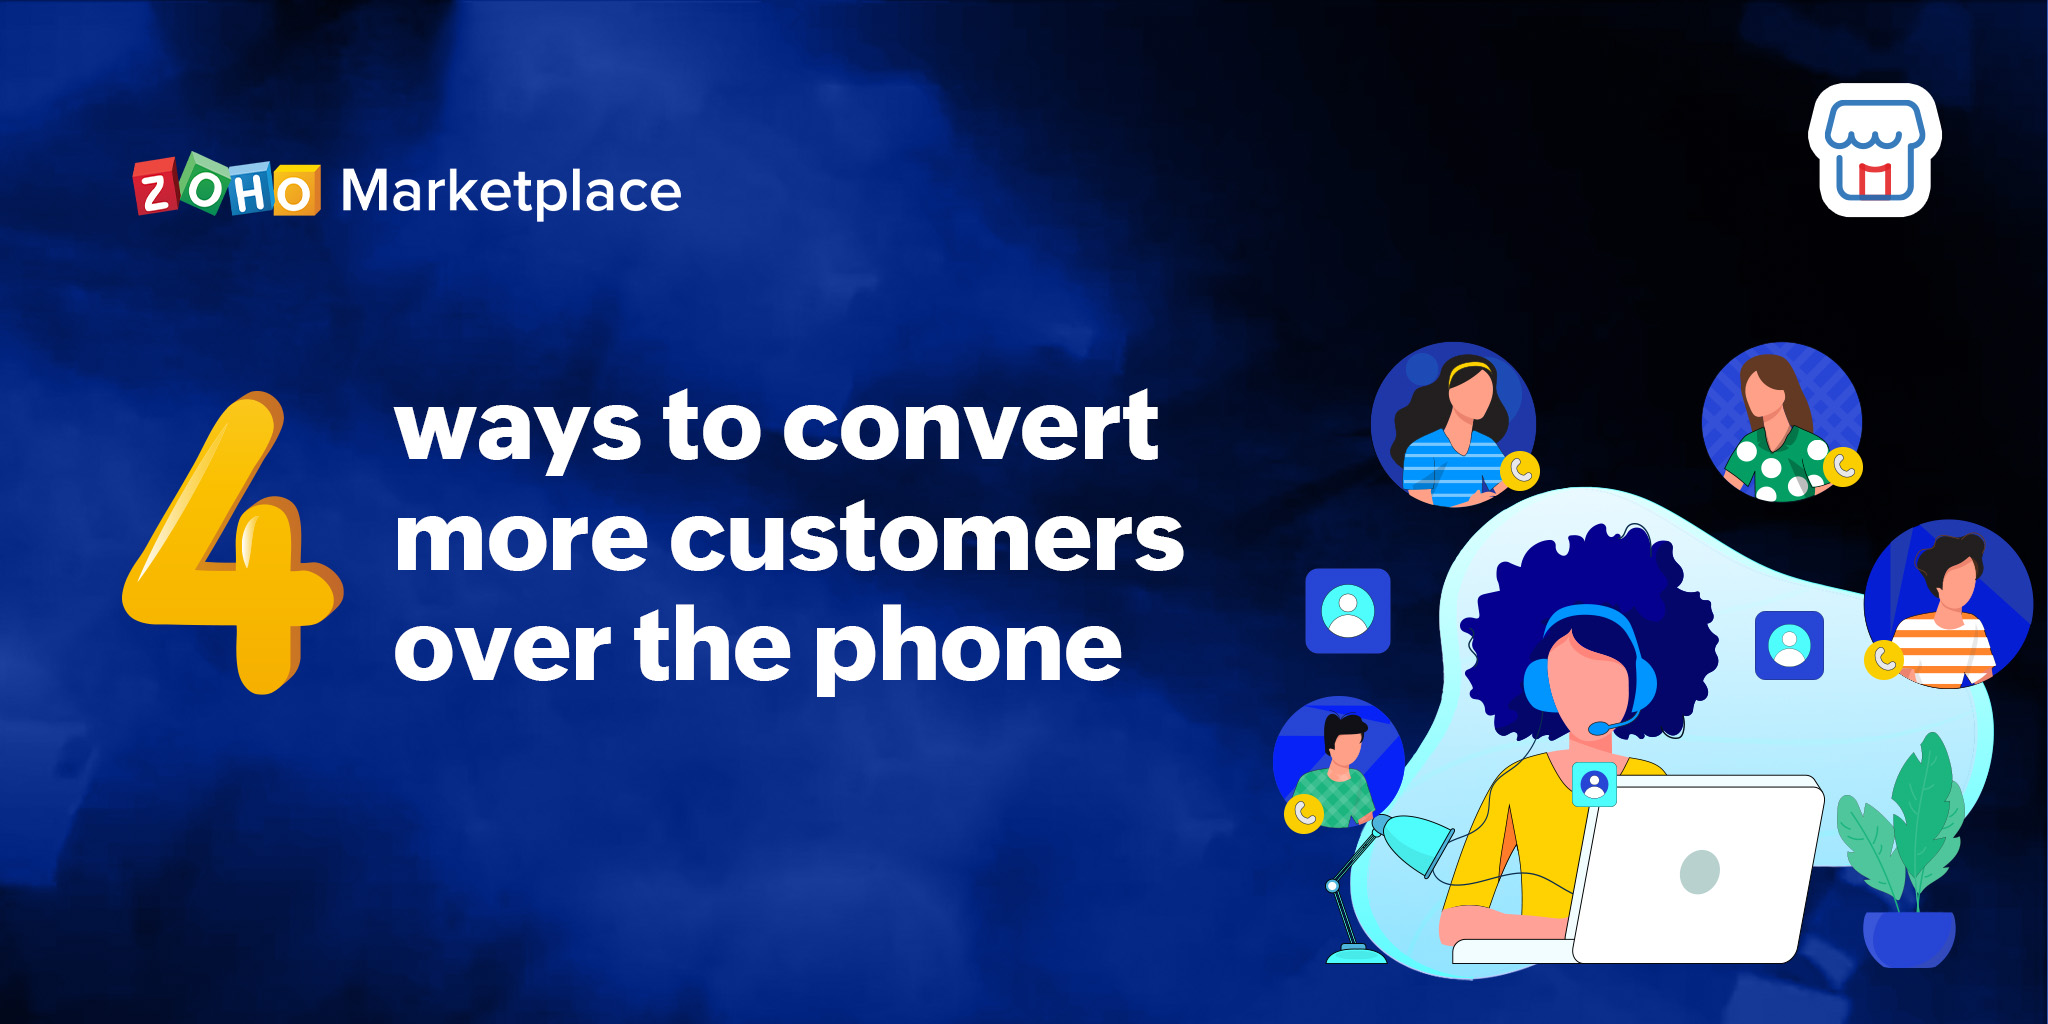 ProTips: 4 ways to convert more customers over the phone